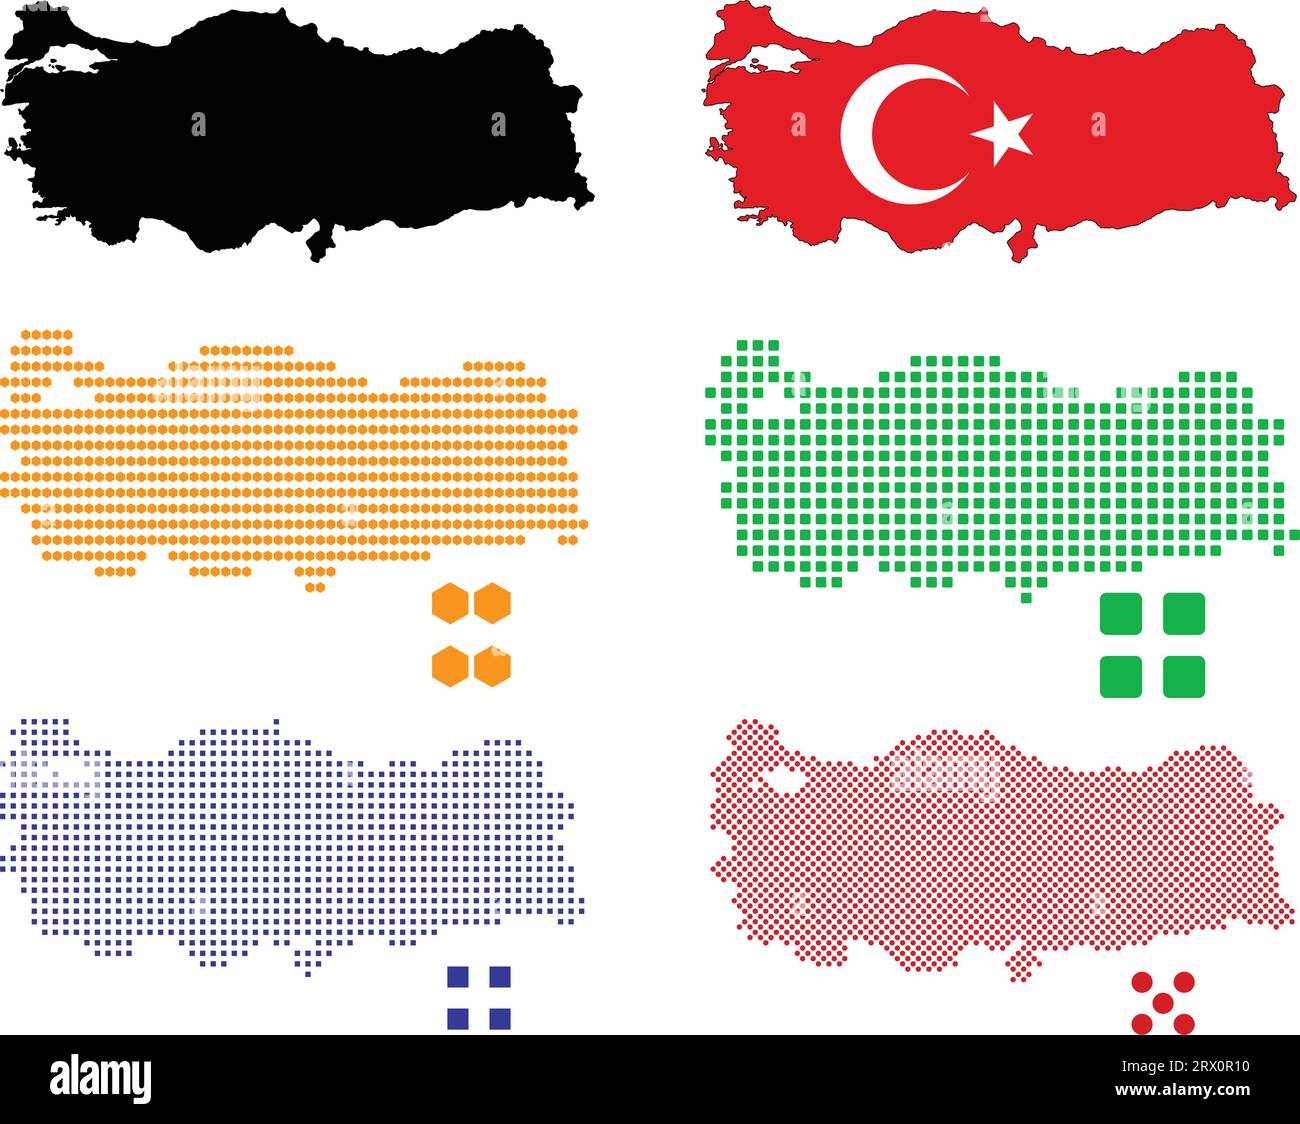 Layered editable vector illustration country map of Turkey,which contains two versions, colorful country flag version and black silhouette version. Stock Vector